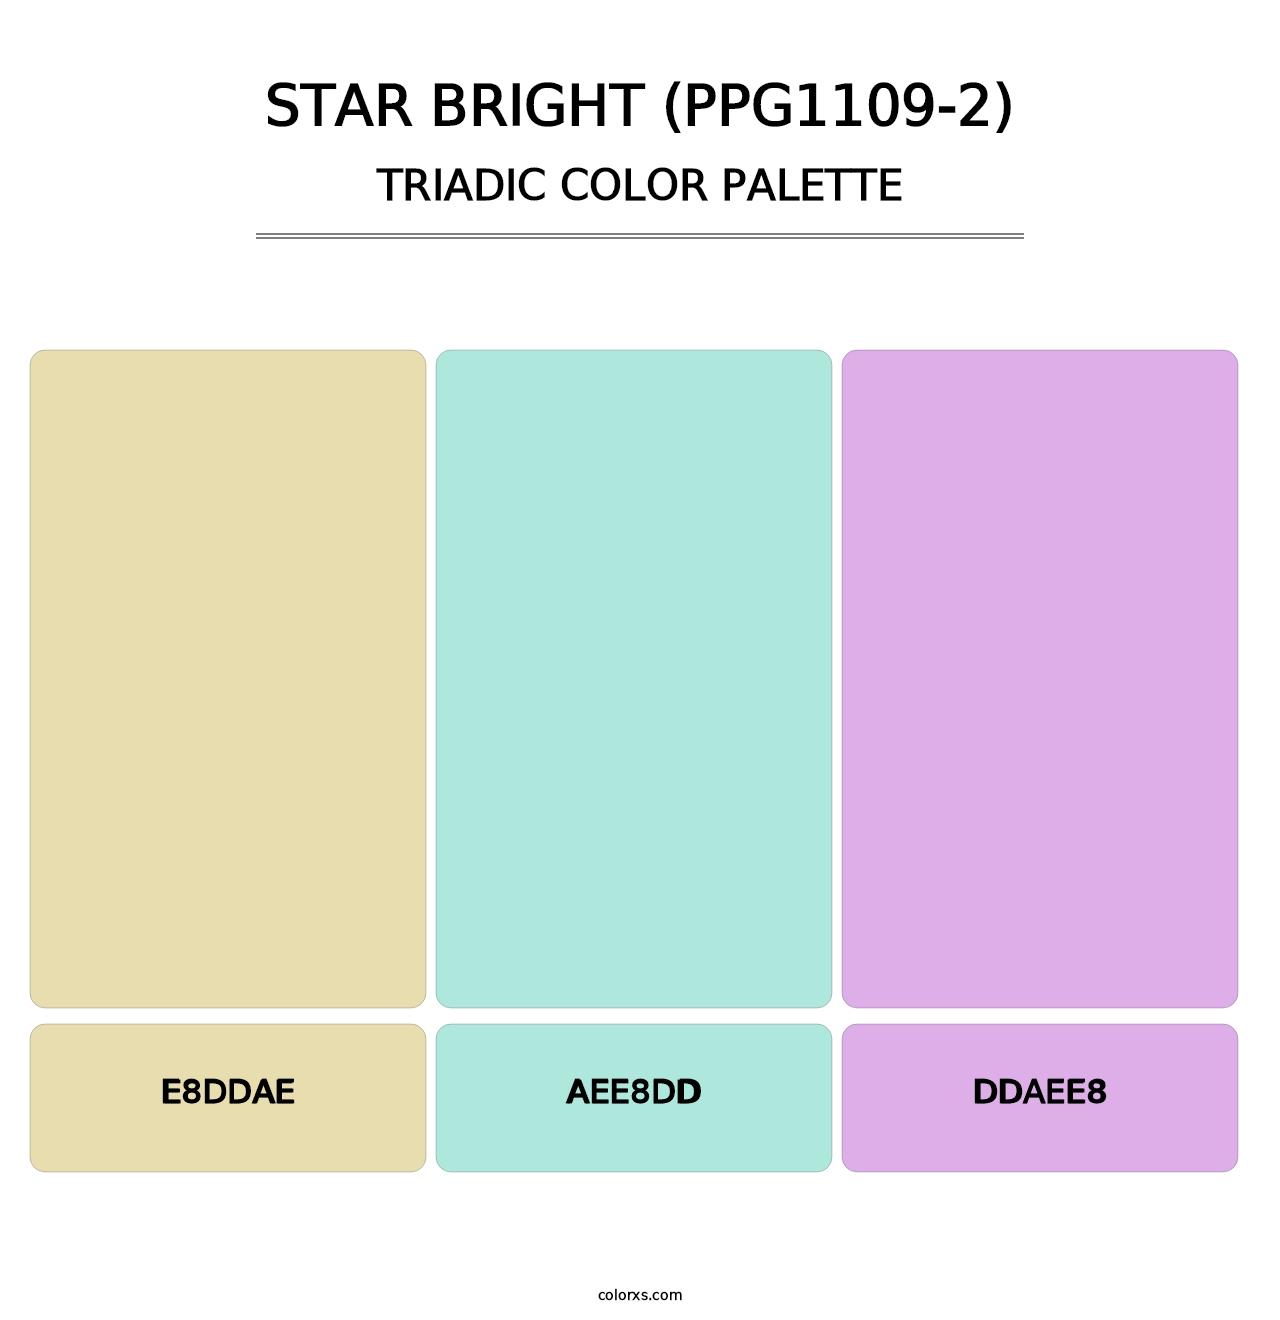 Star Bright (PPG1109-2) - Triadic Color Palette